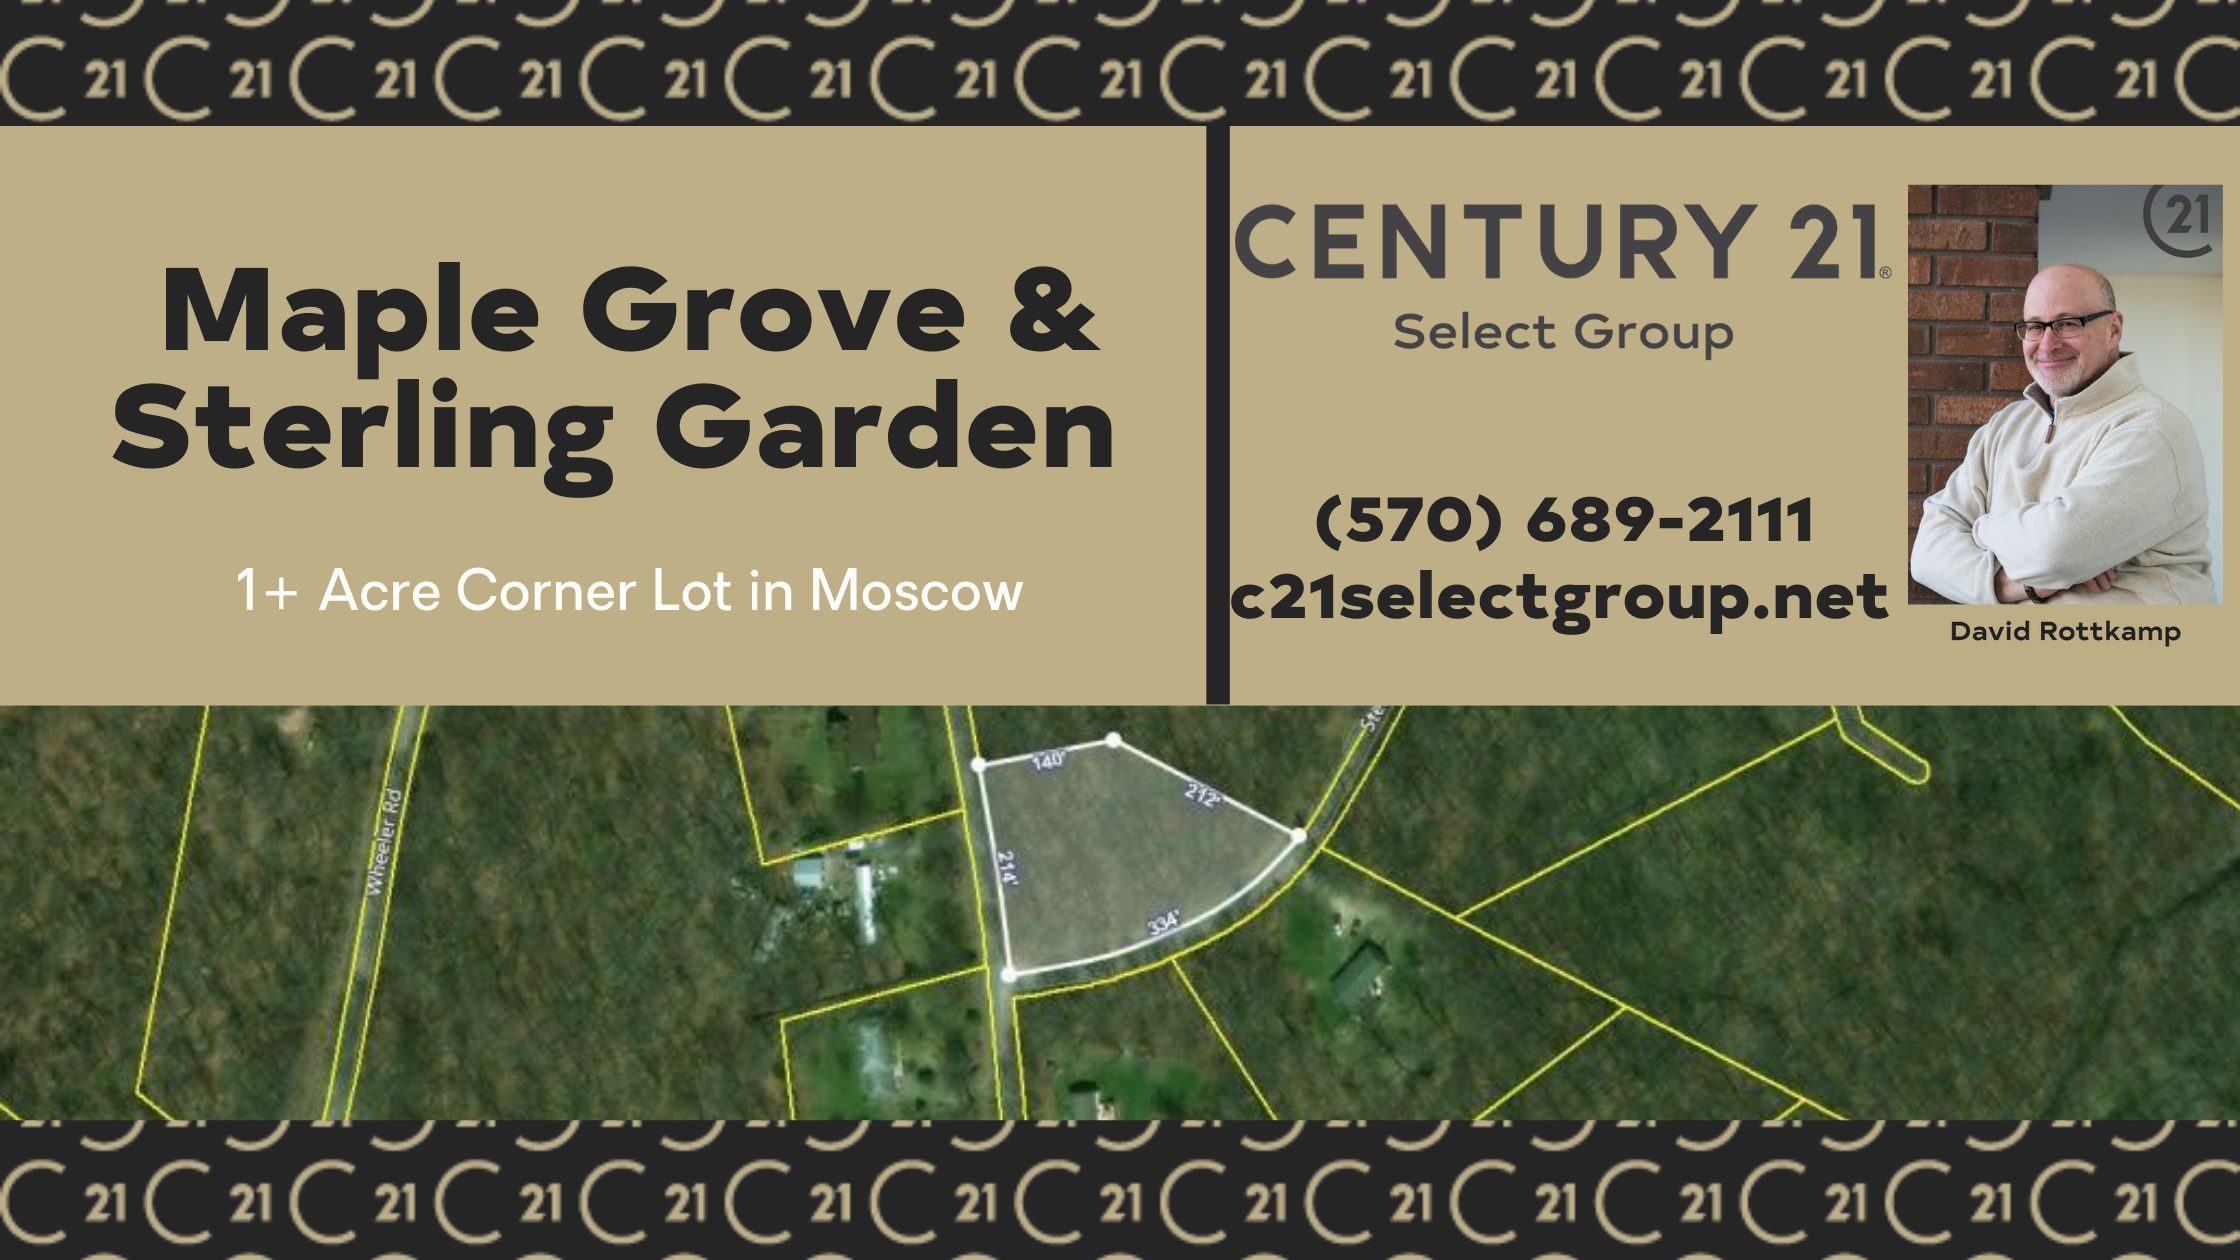 Maple Grove & Sterling Garden: 1+ Acre Corner Lot in Moscow